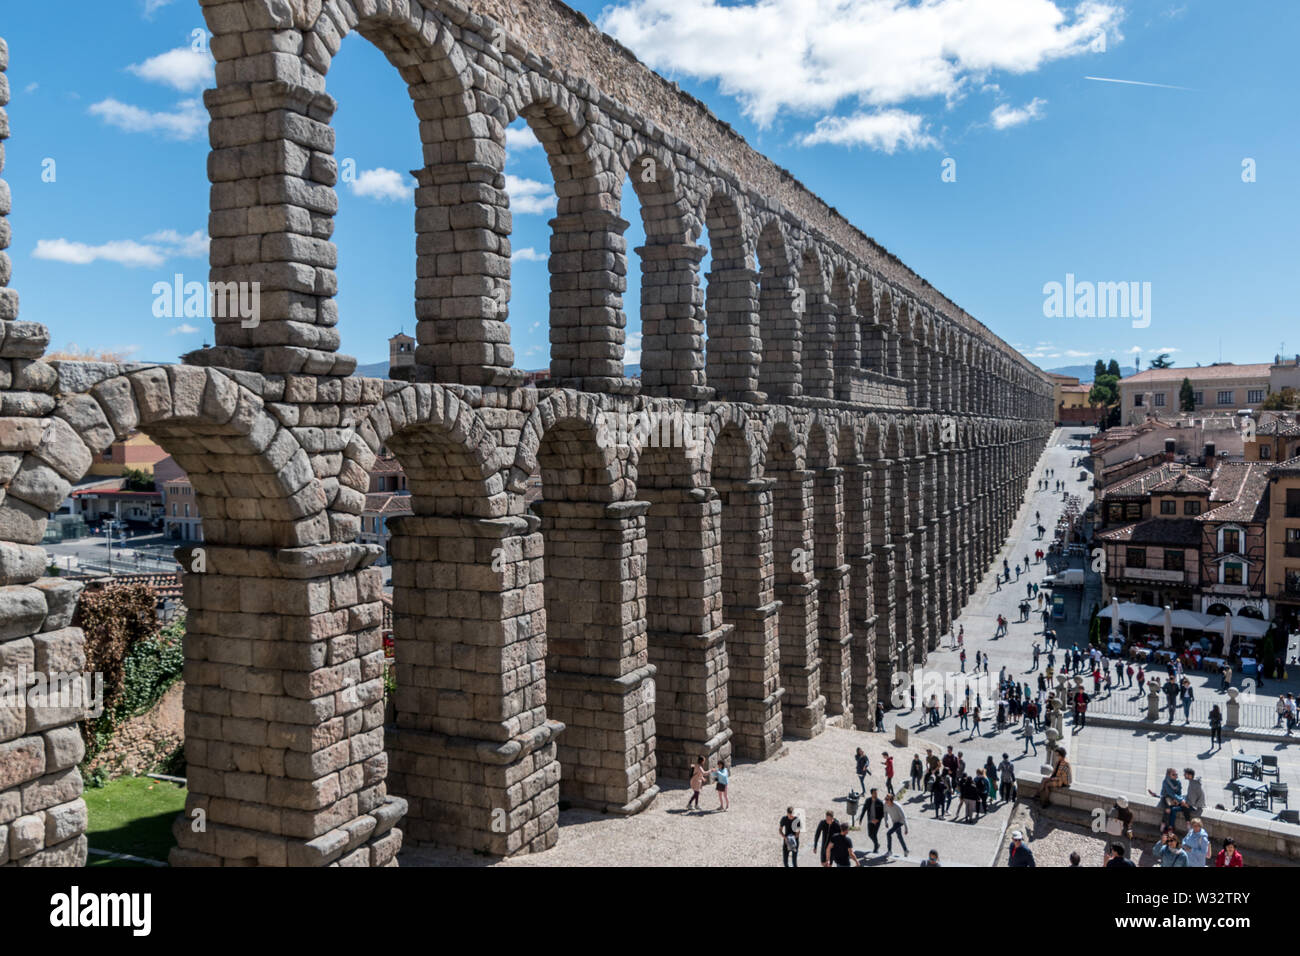 The Aqueduct of Segovia is a Roman aqueduct in Segovia, Spain. It is one of the best-preserved elevated Roman aqueducts Stock Photo